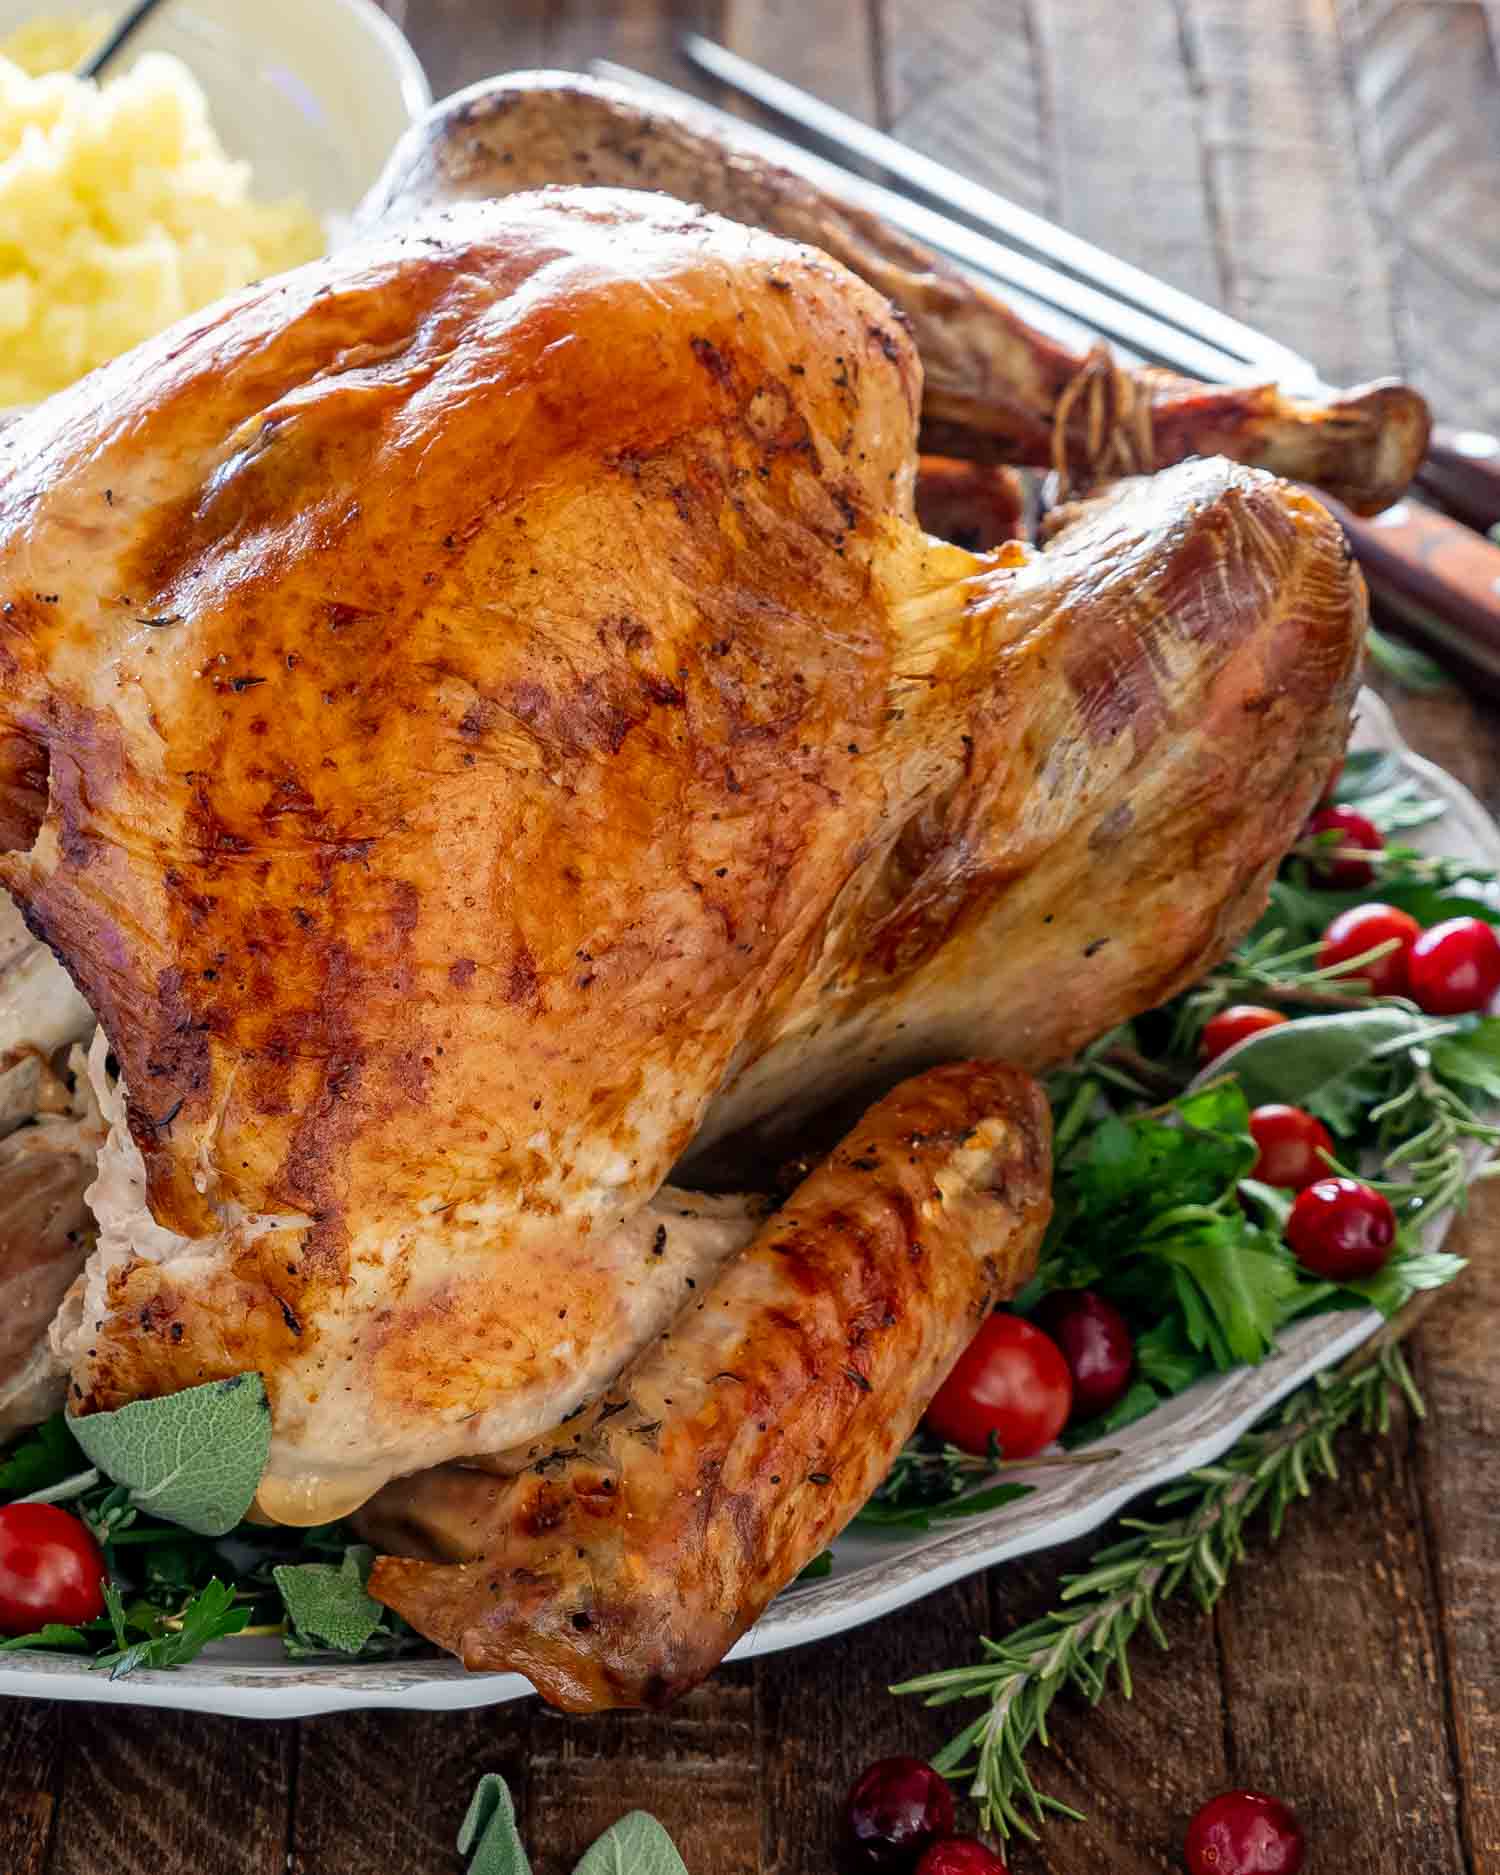 a roast turkey on a turkey platter garnished with herbs and cranberries.